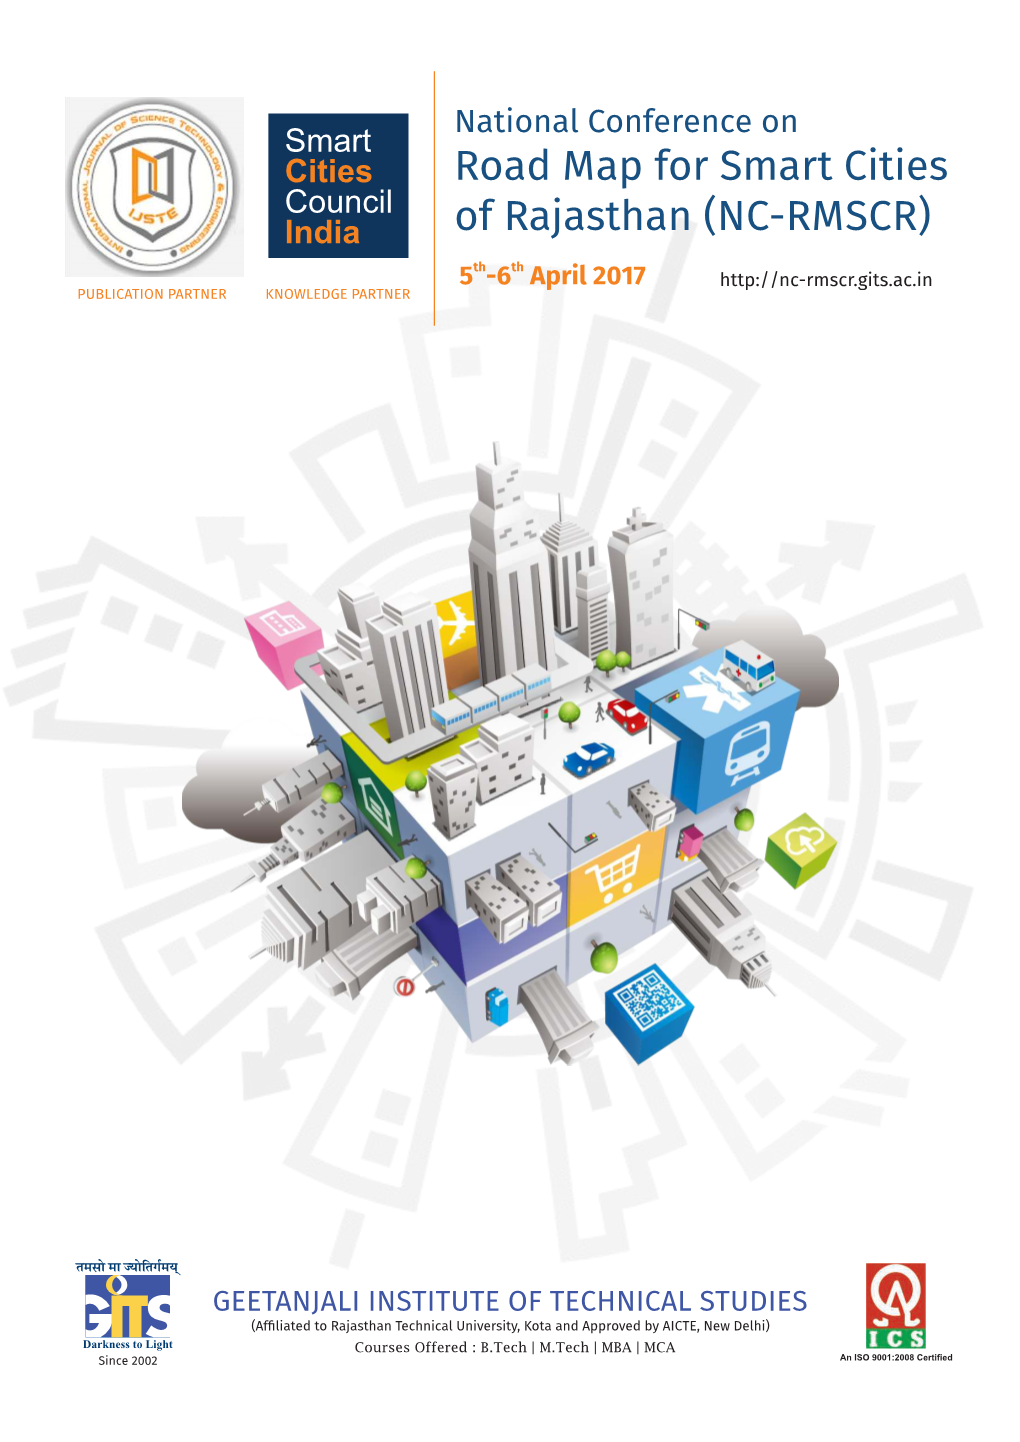 Road Map for Smart Cities of Rajasthan (NC-RMSCR)